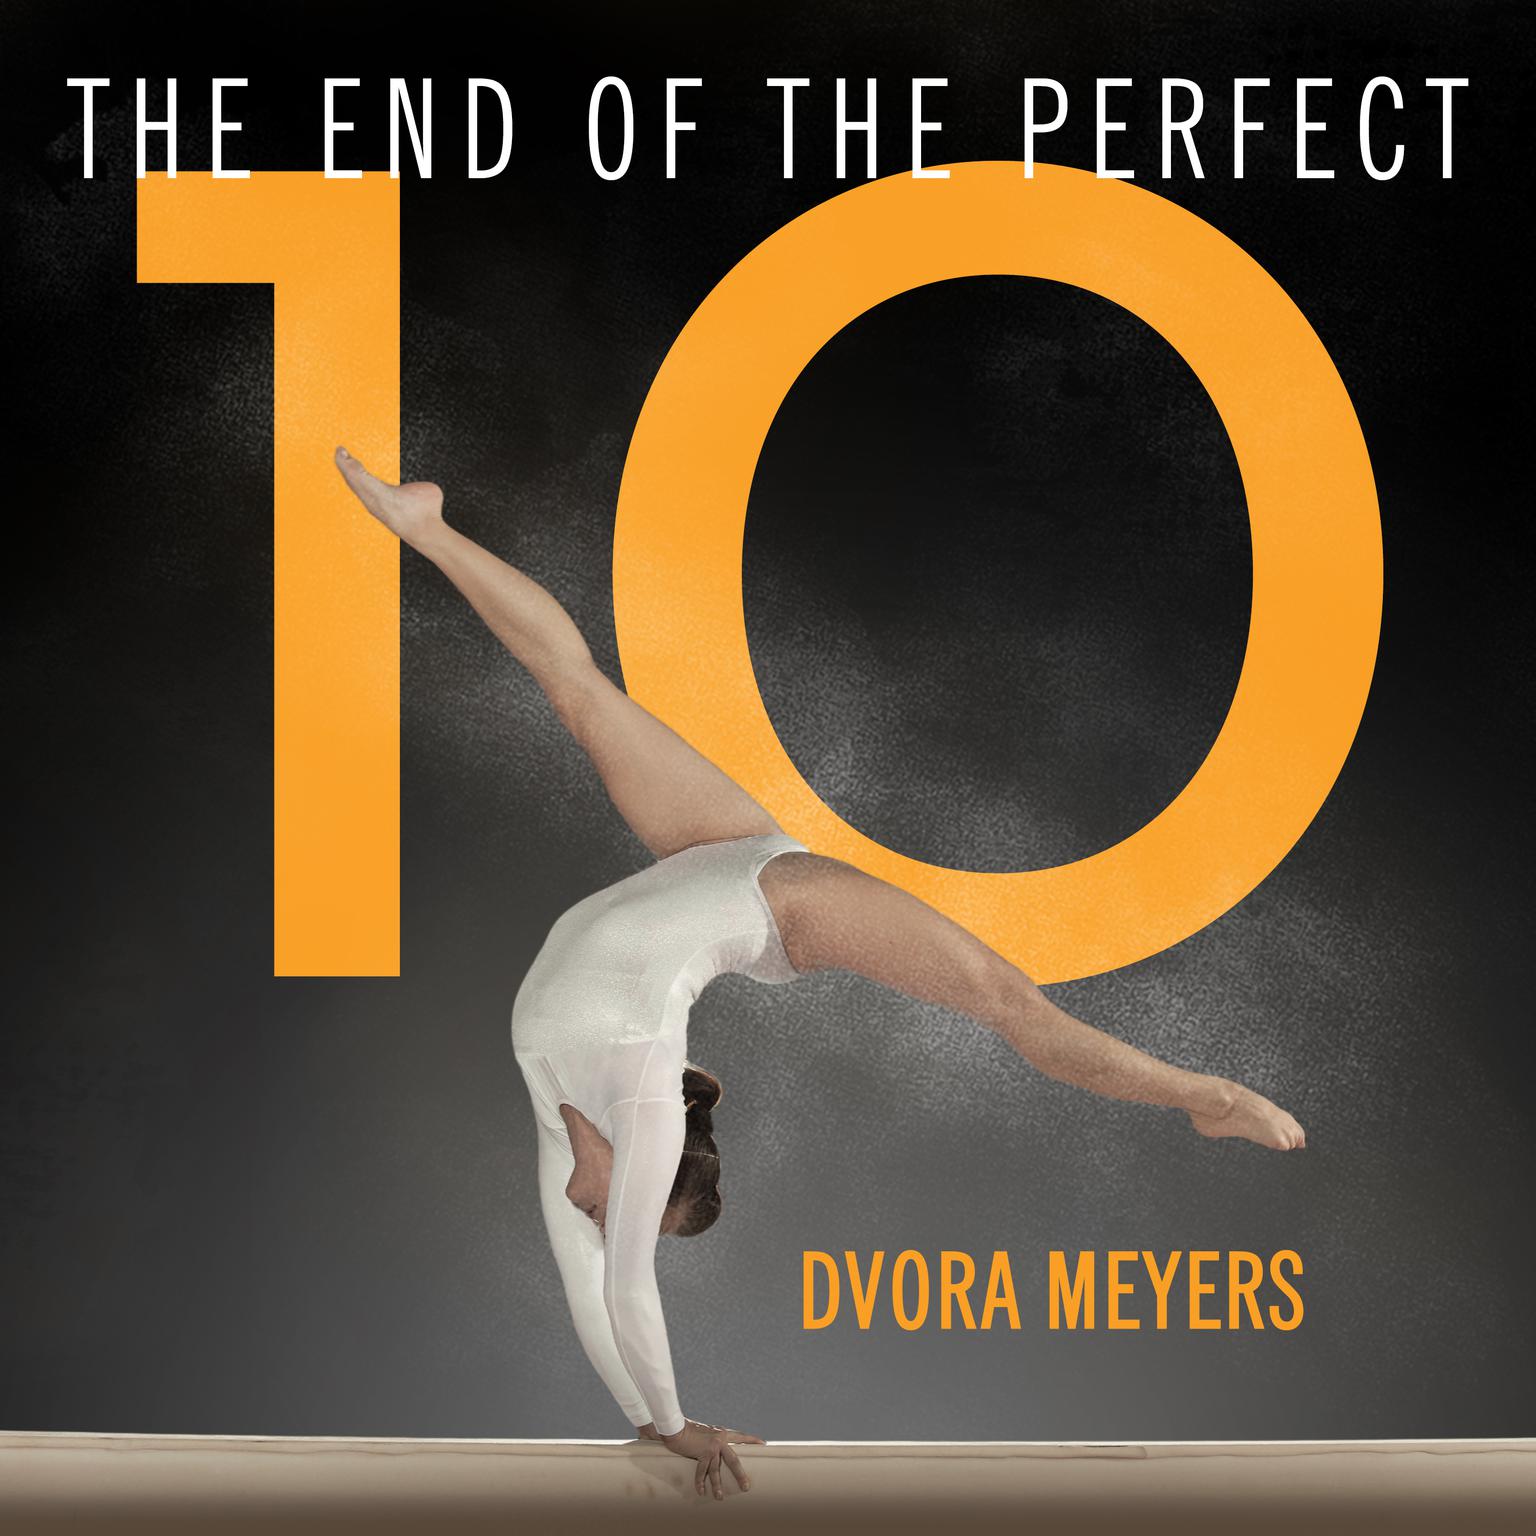 The End of the Perfect 10: The Making and Breaking of Gymnastics Top Score from Nadia to Now Audiobook, by Dvora Meyers